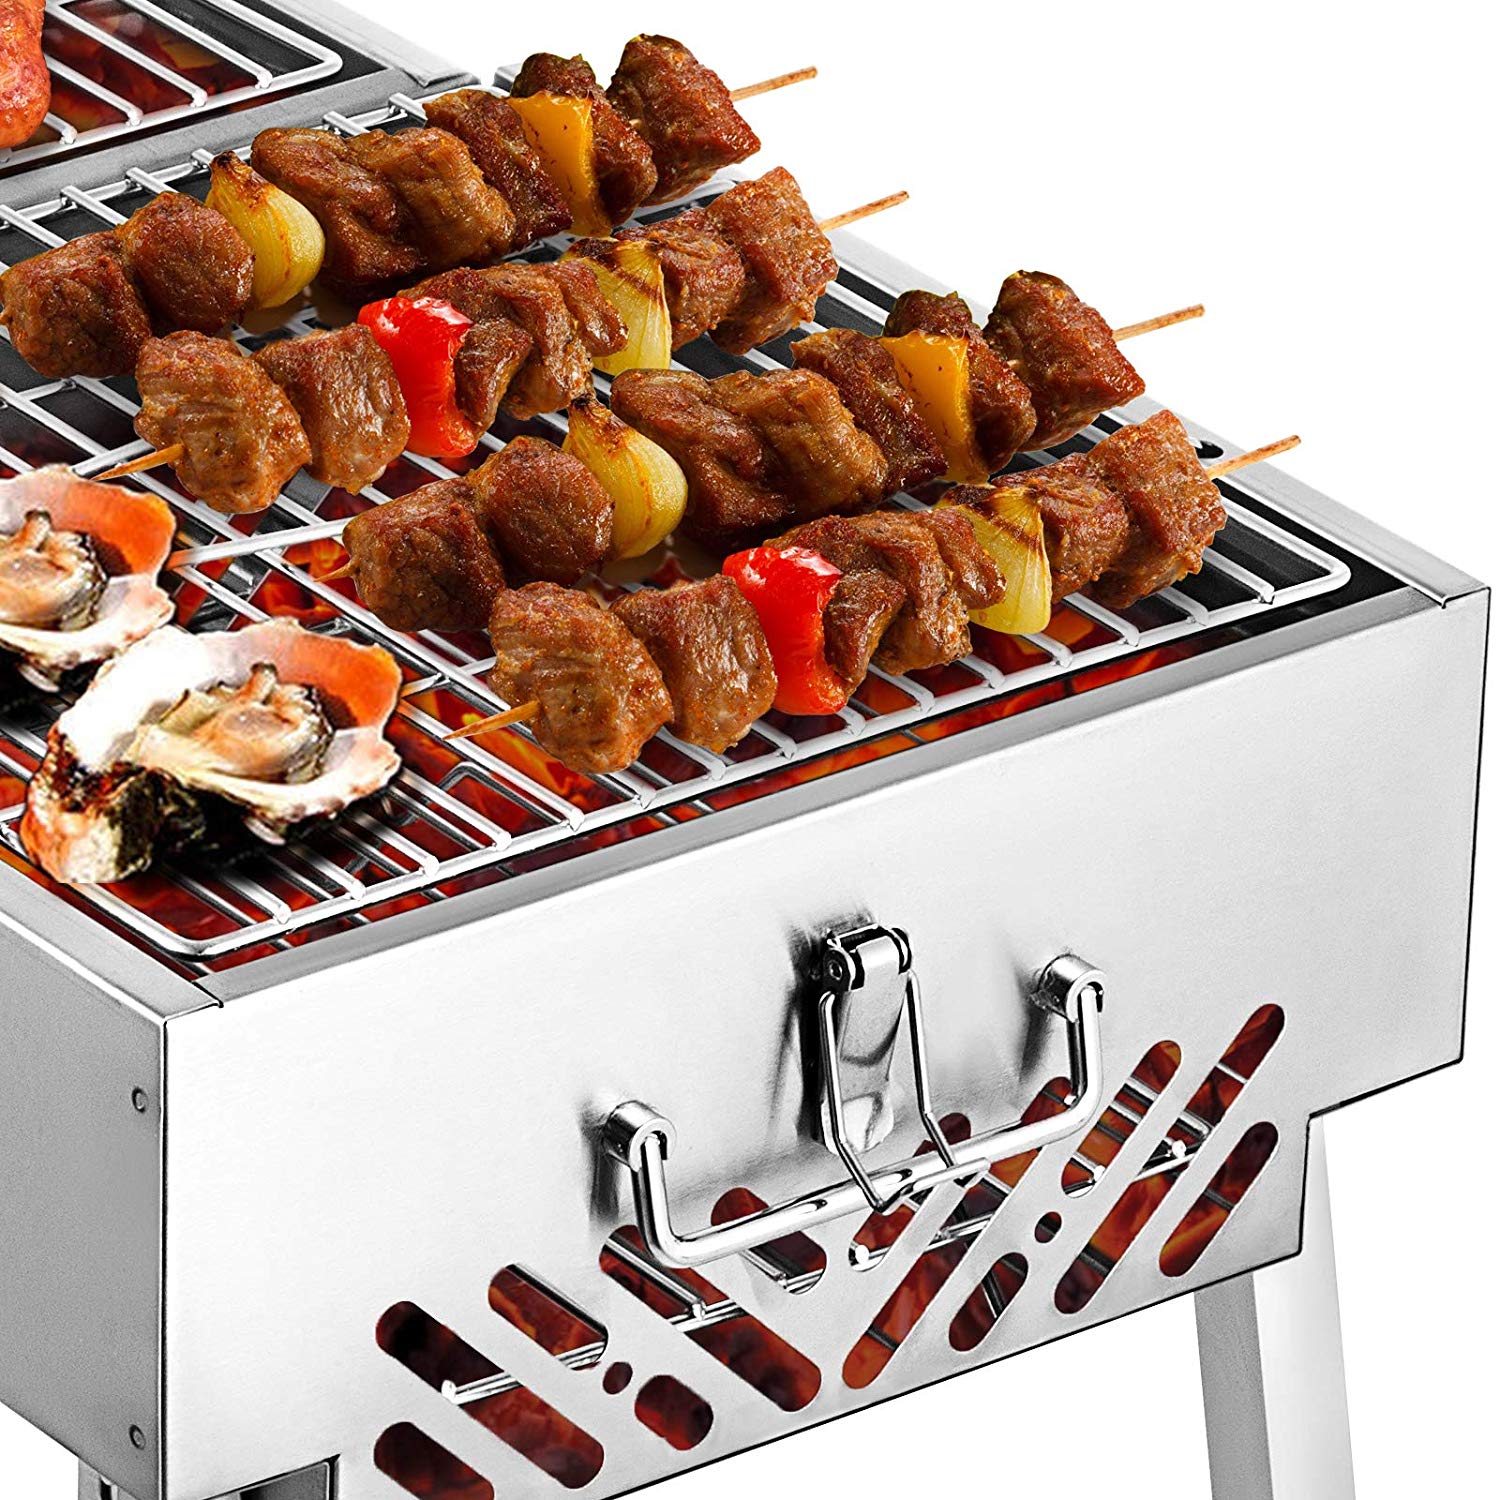 Folded Portable Charcoal BBQ Grill 24x12 inches Outdoor Barbecue Kebab Grill Folding Grill Portable Grill Perfect for Camping